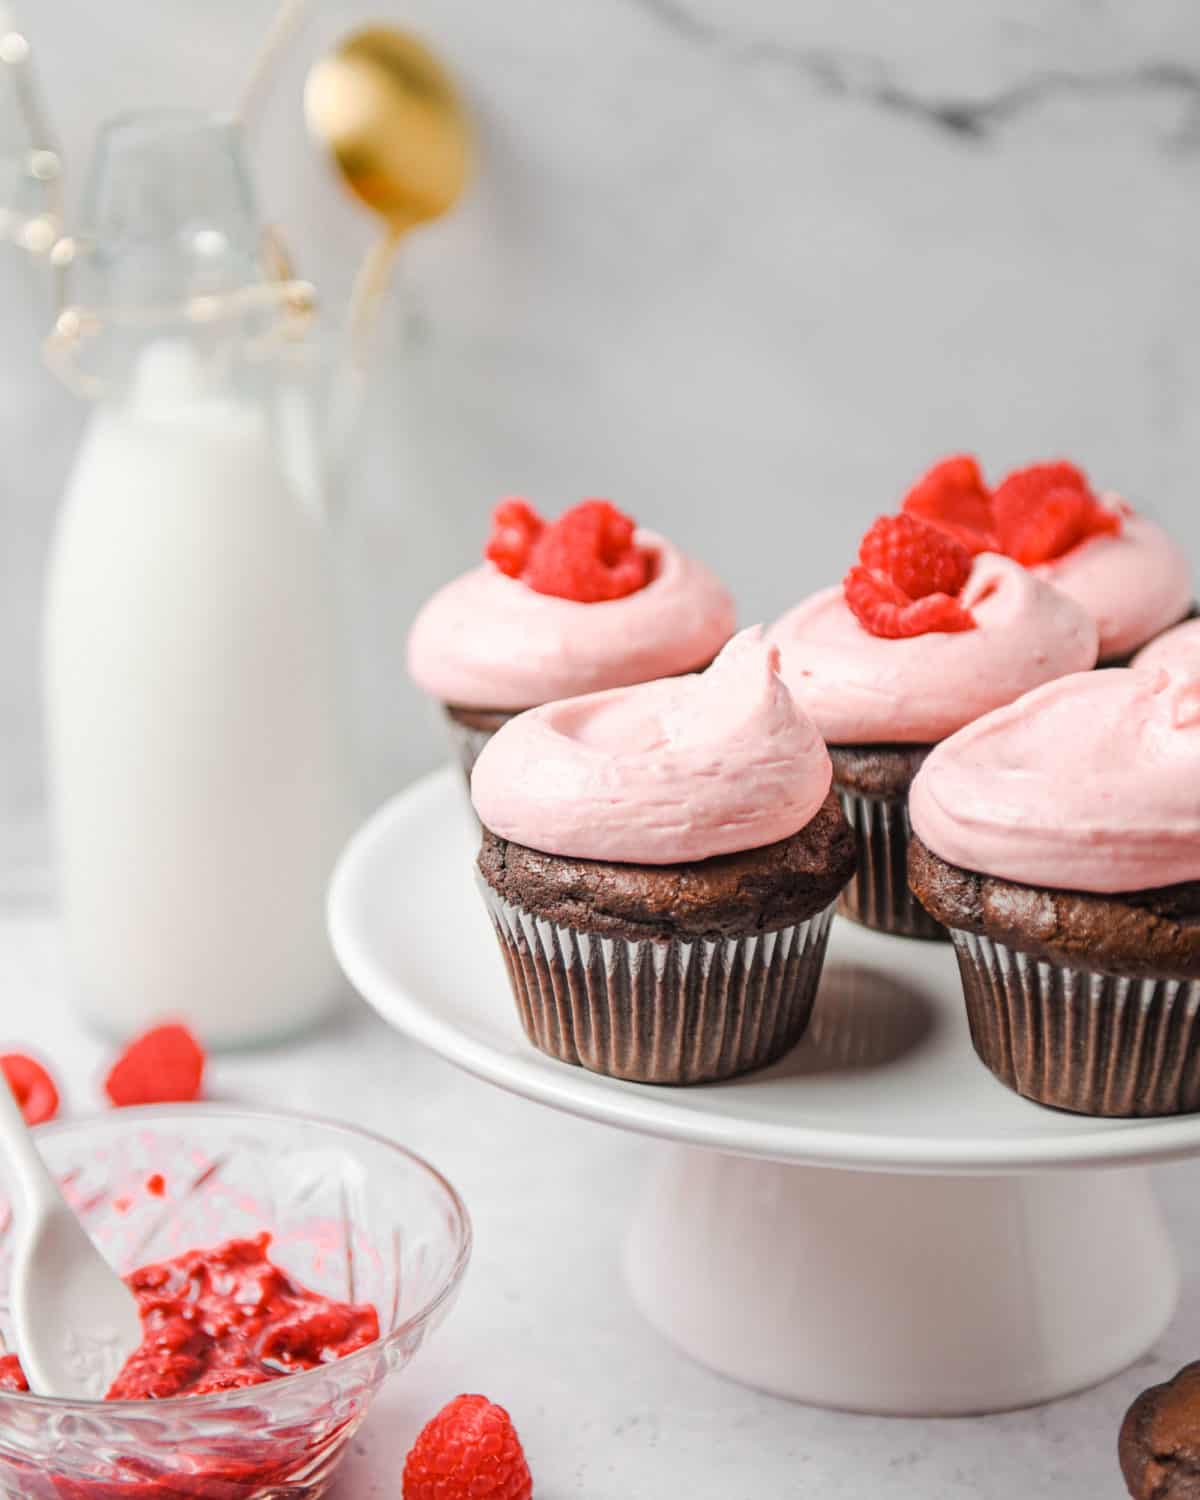 Several chocolate cupcakes with raspberry frosting on a cake stand.